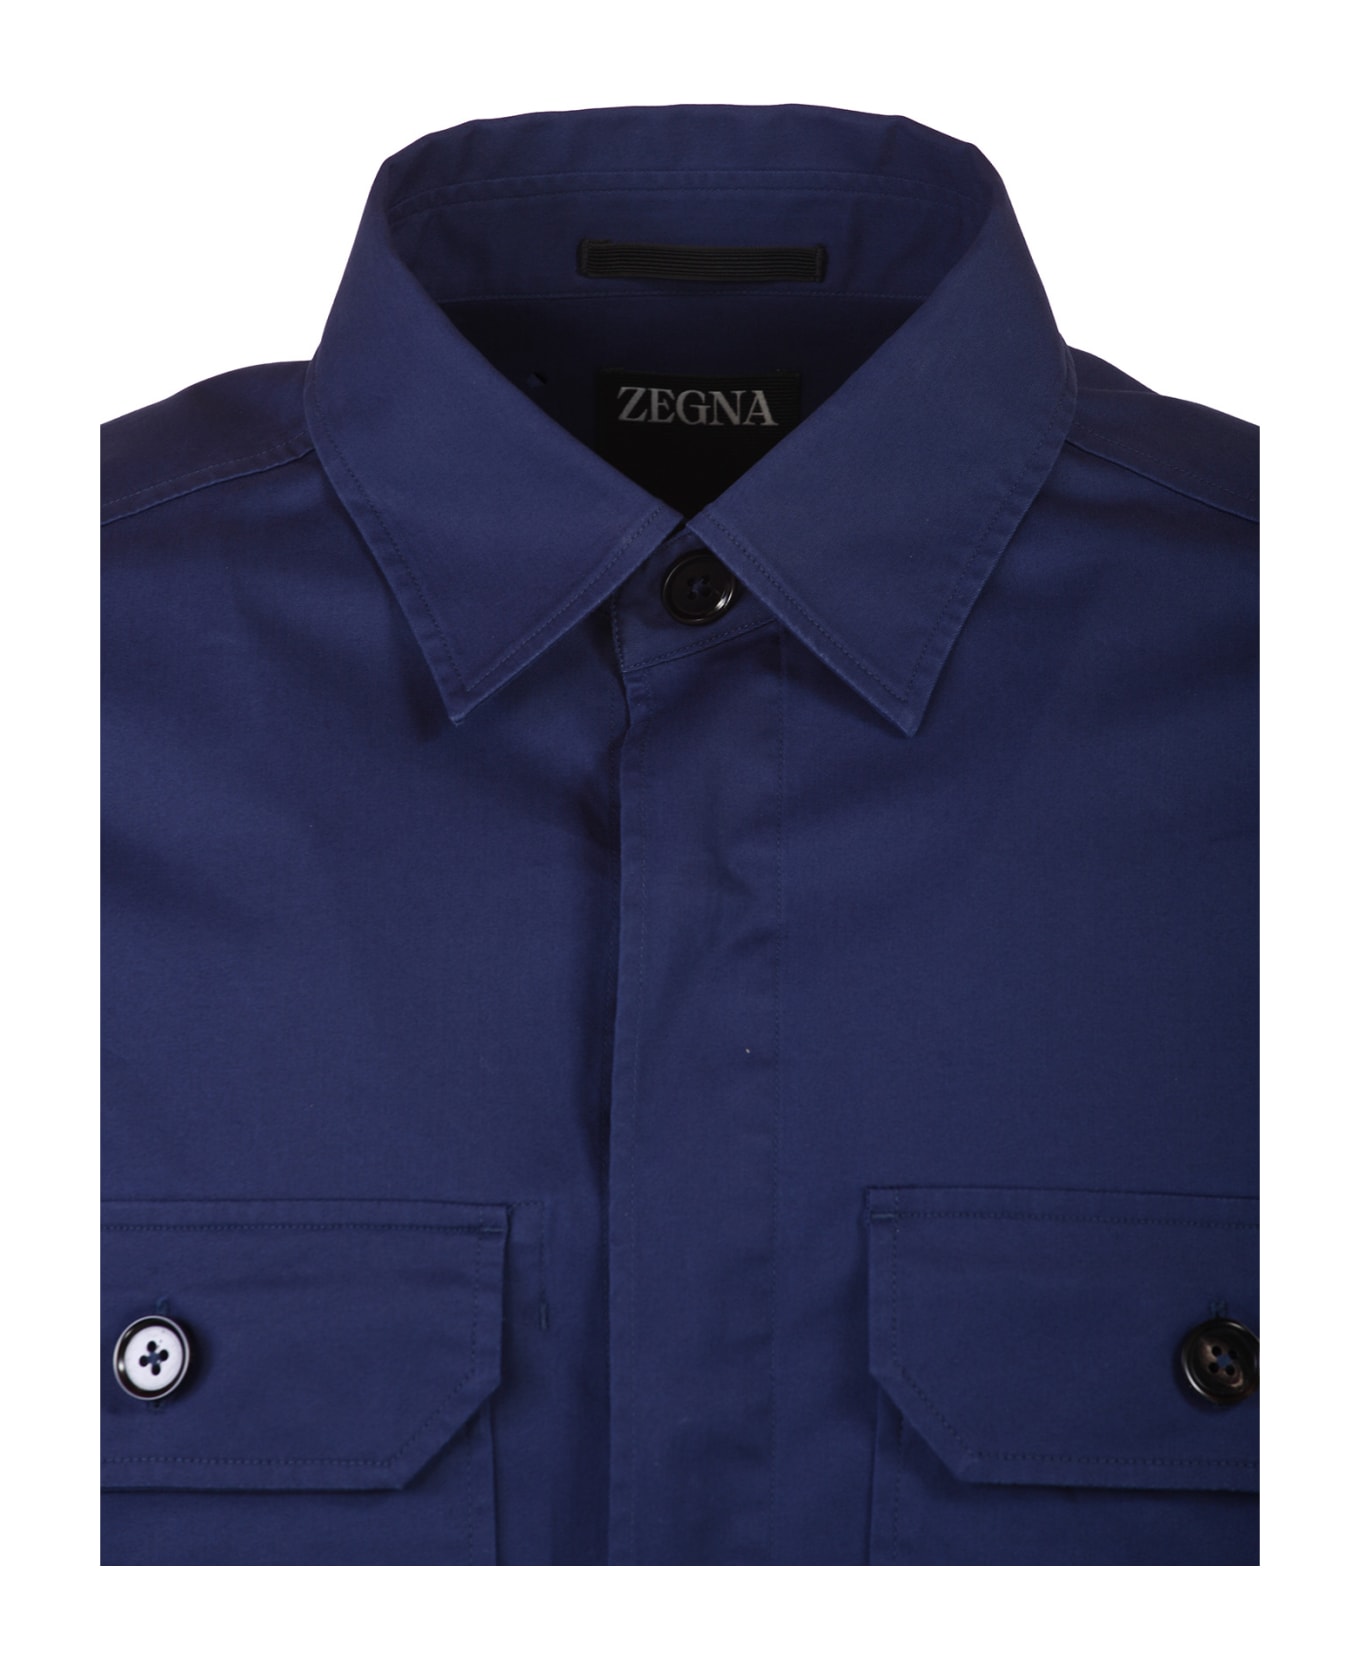 Zegna Jackets Clear Blue - Clear Blue ブレザー